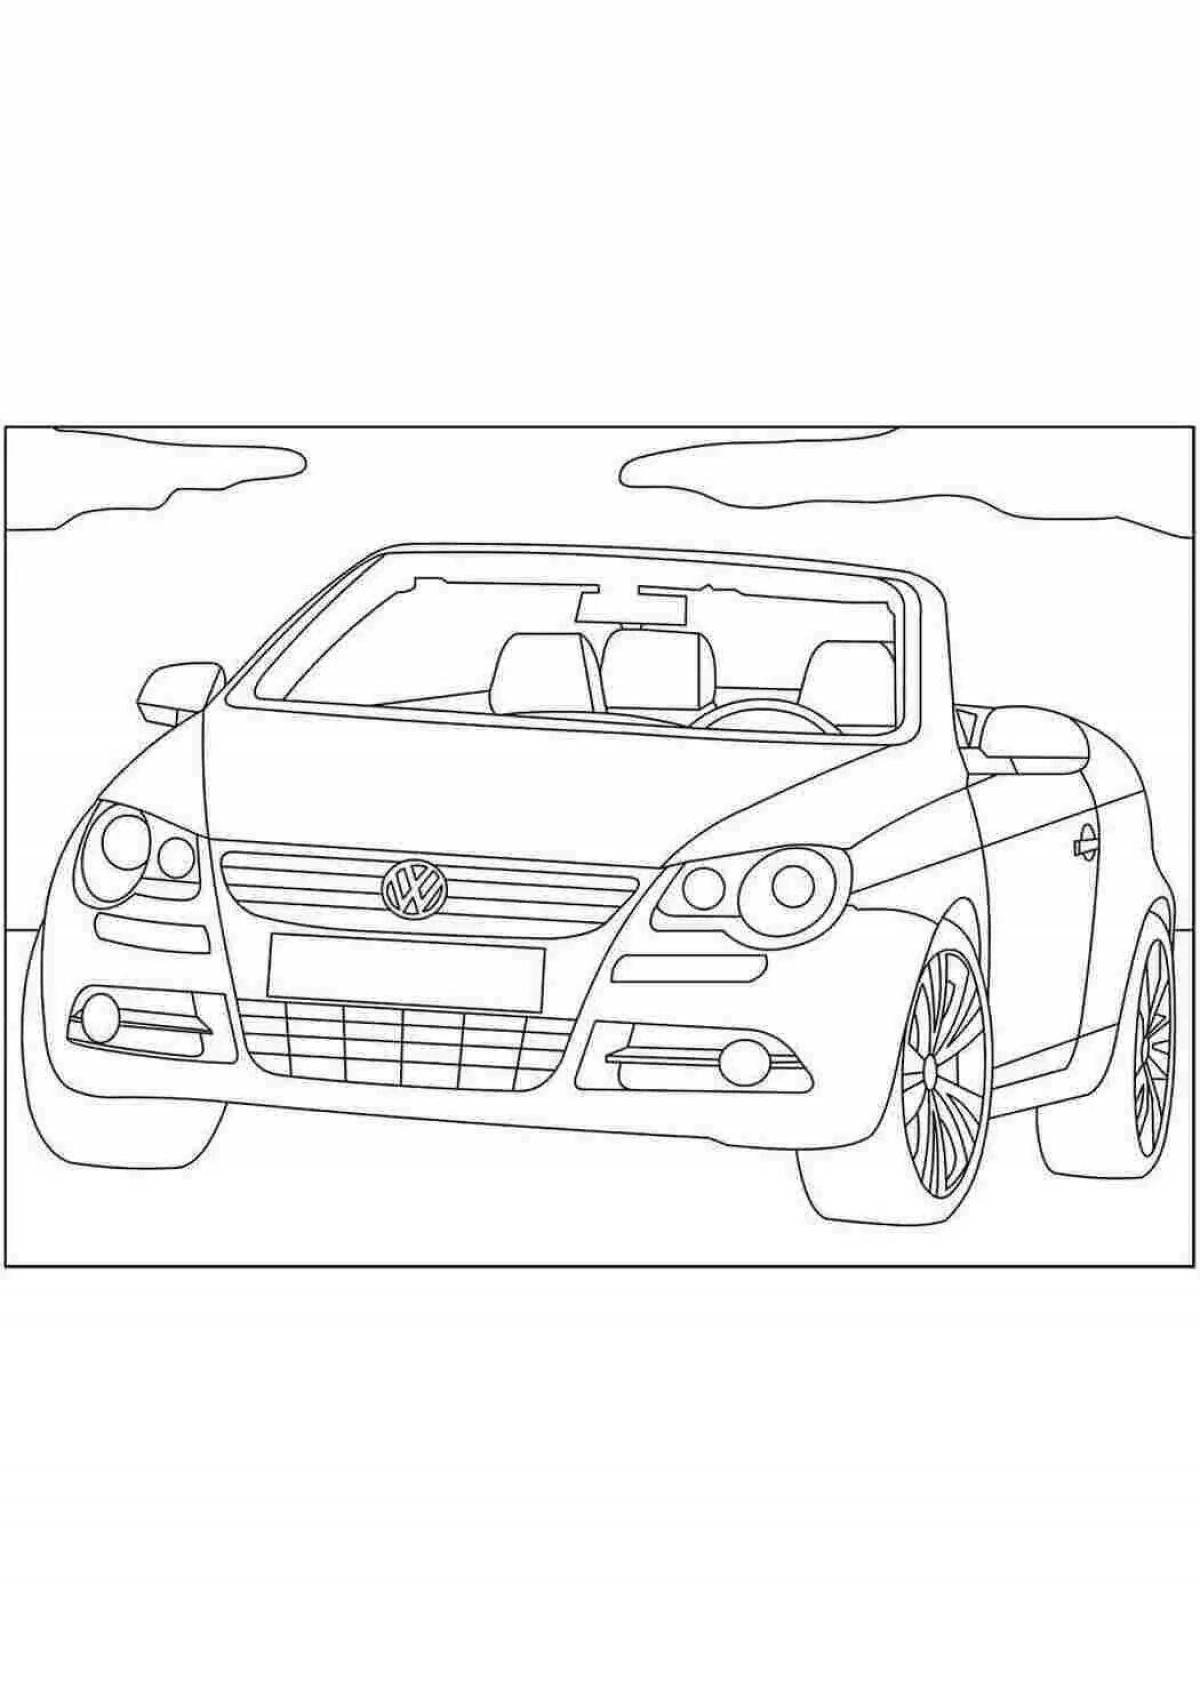 Charming volkswagen cars coloring book